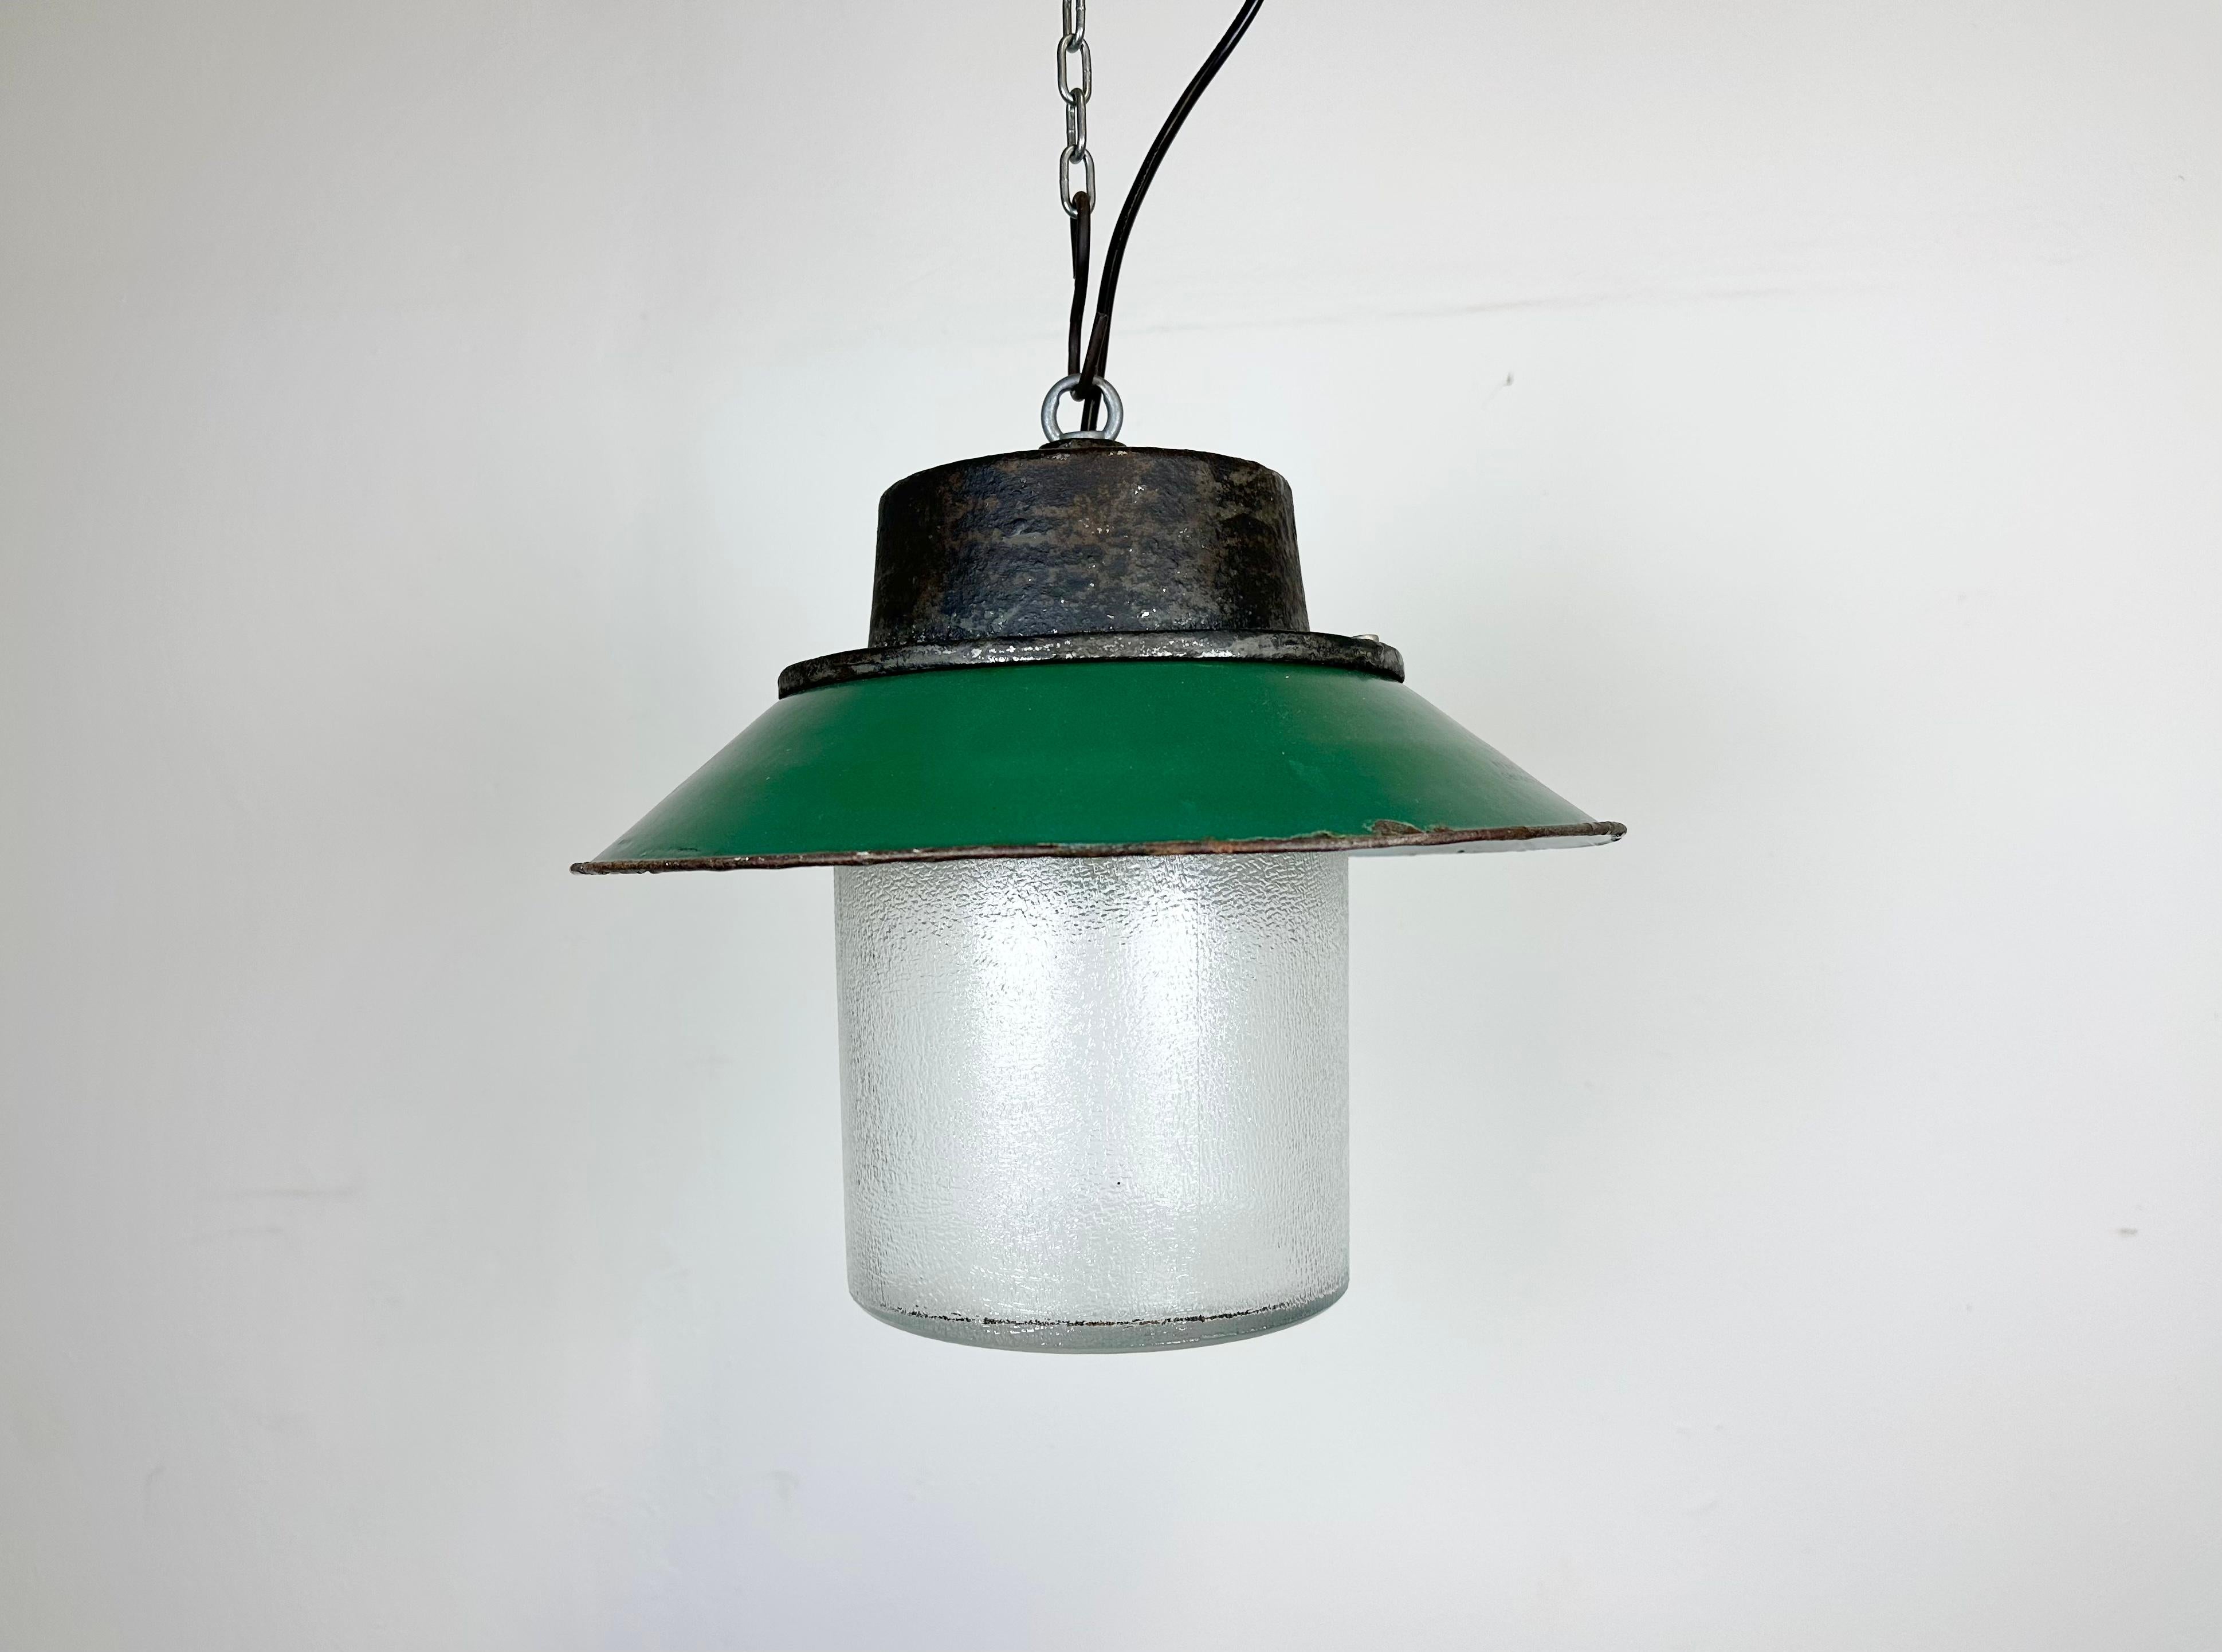 Industrial hanging lamp manufactured in Poland during the 1960s. It features a green enamel shade with a white enamel interior, a cast iron top and a frosted glass cover. The porcelain socket requires E 27/ E26 lightbulbs. New wire. The weight of